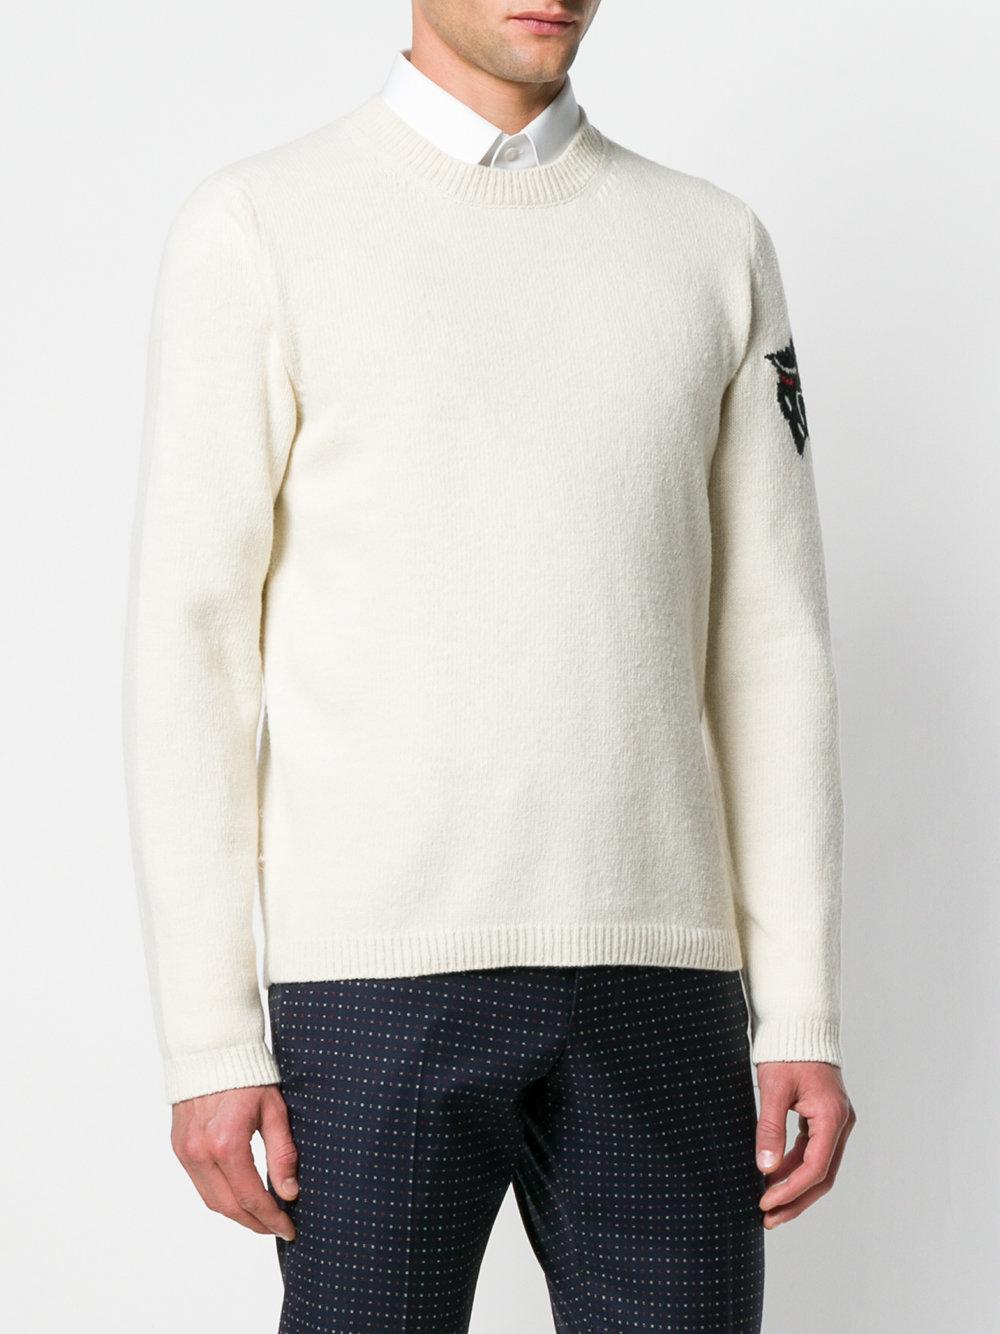 Gucci sweaters for men white cheap furniture party